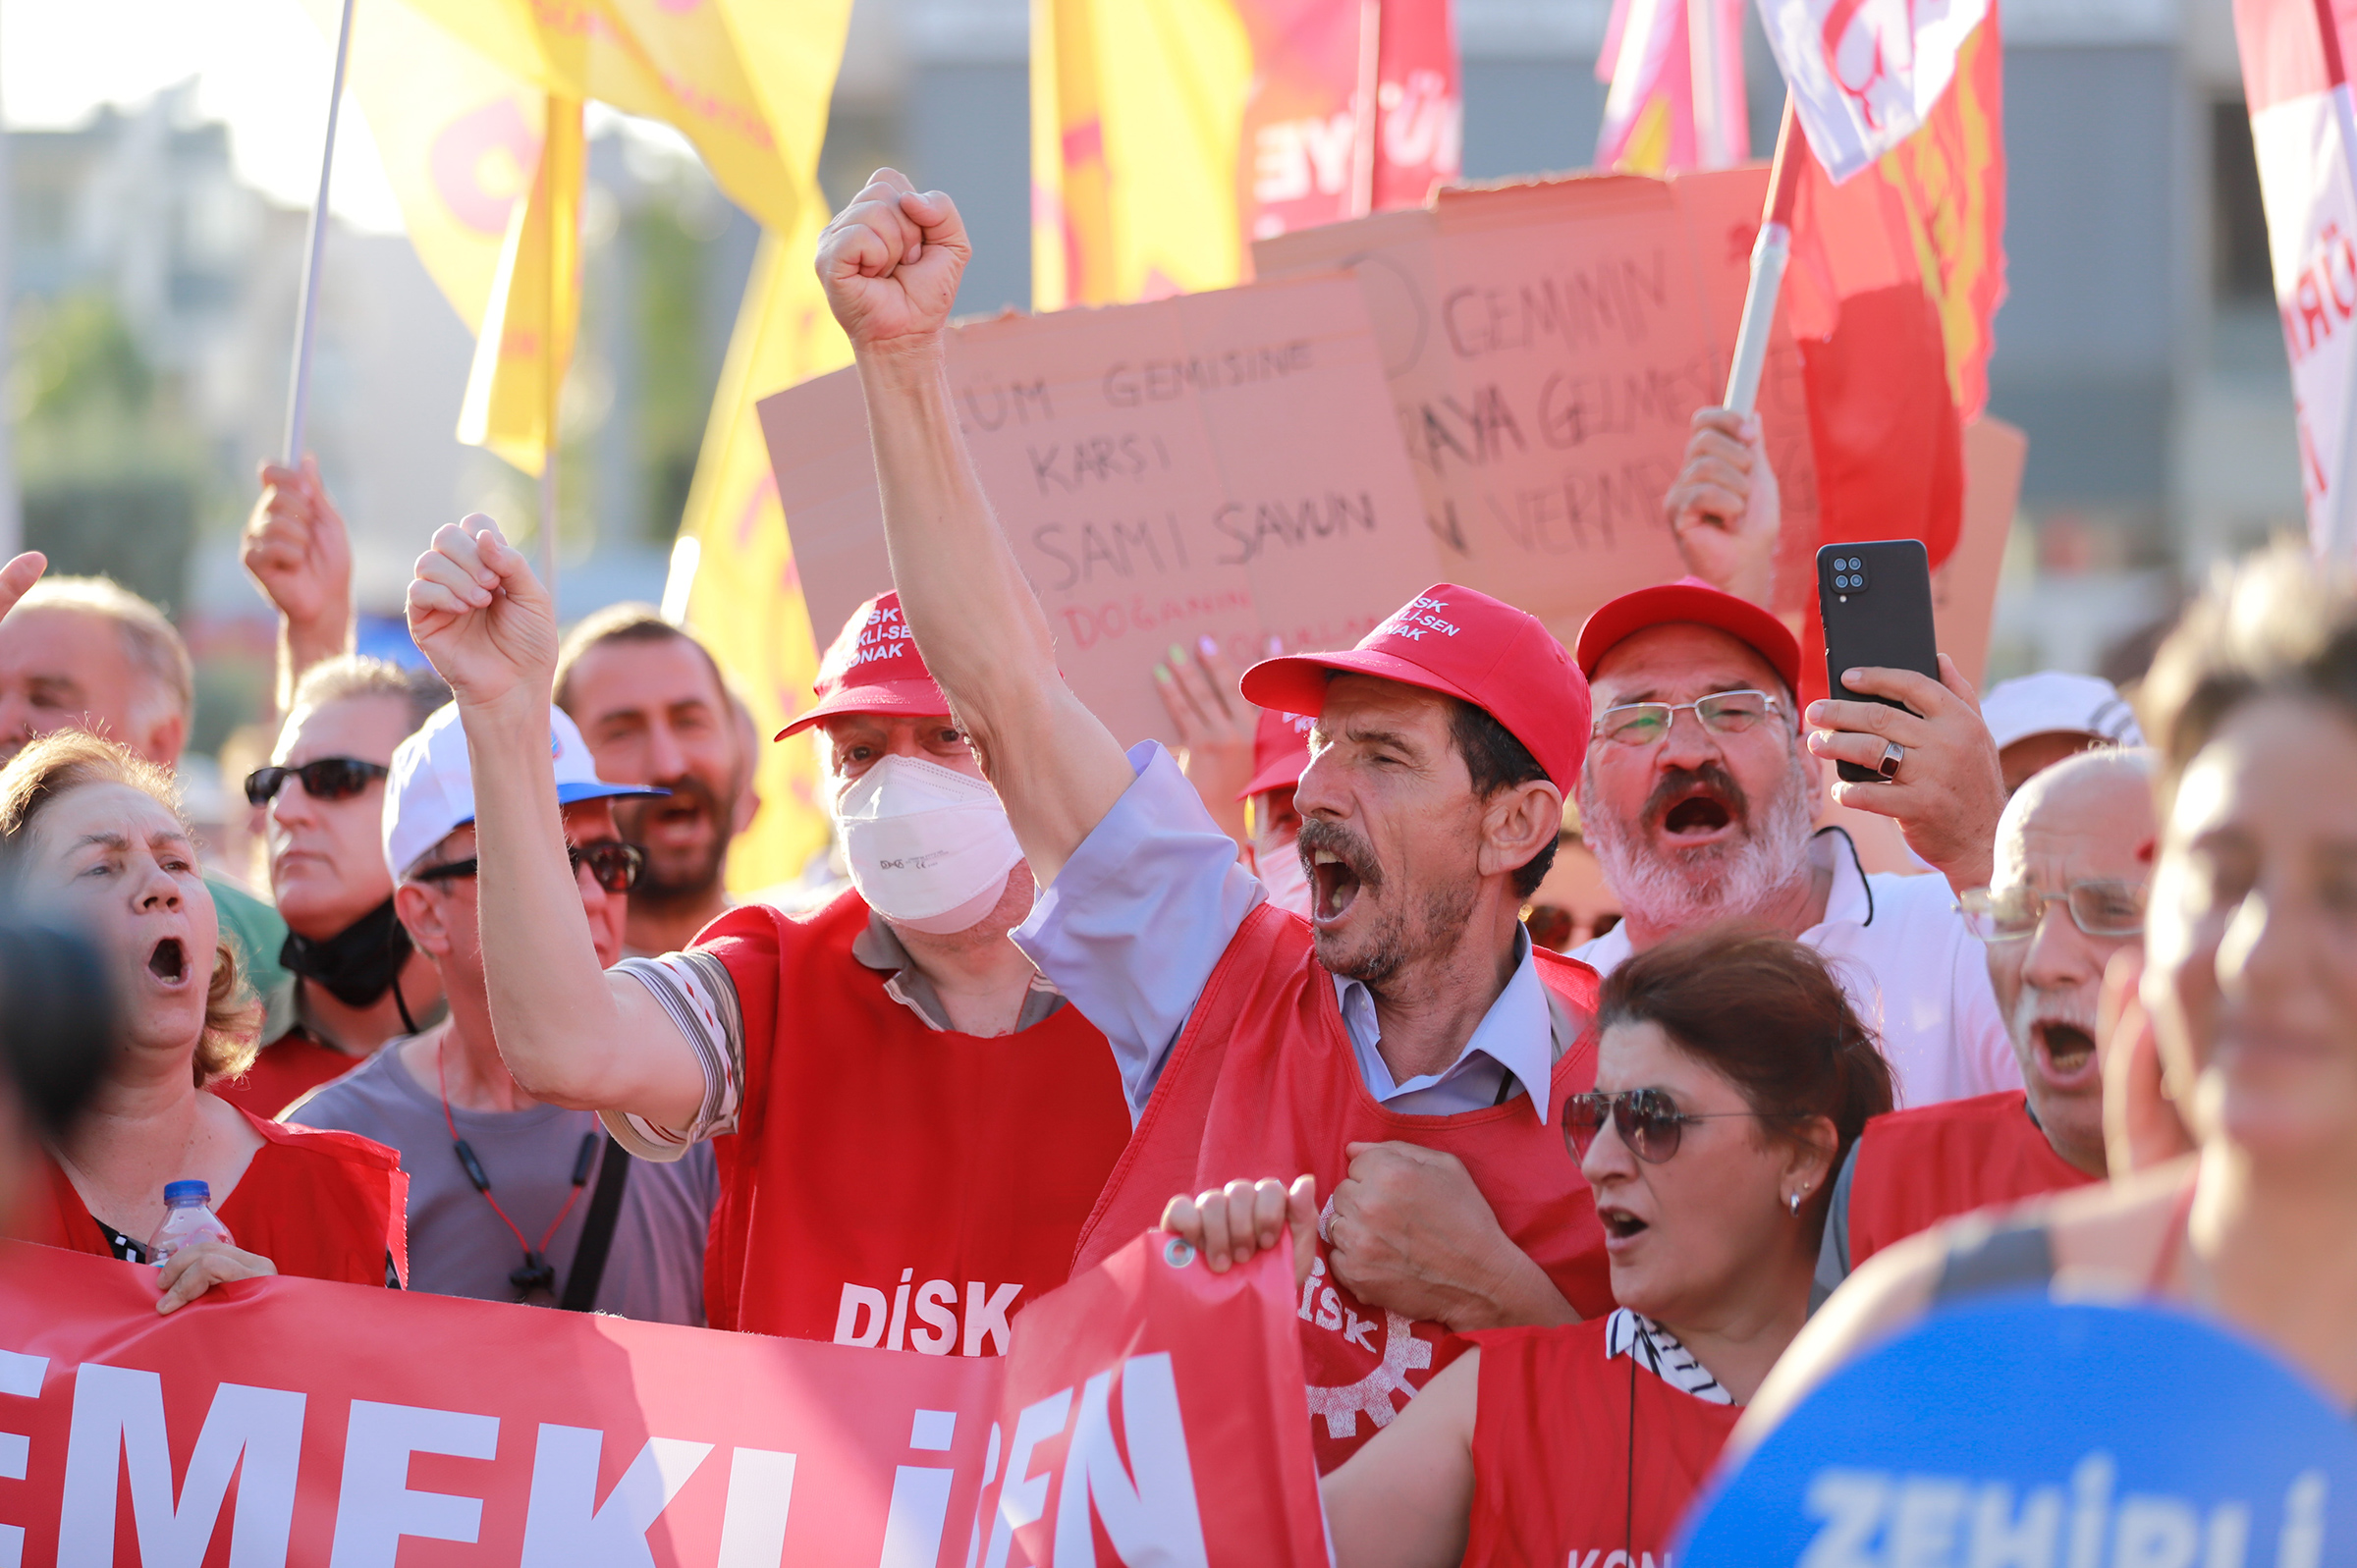 Turkey's various opposition political parties, labour unions, and non-governmental organisations held a mass rally against the dismantle of Brazilian aircraft carrier Nae Sao Paulo in Aliaga district in Izmir, Turkey, on Aug. 4, 2022. (Berkcan Zengin—GocherImagery/Reuters)